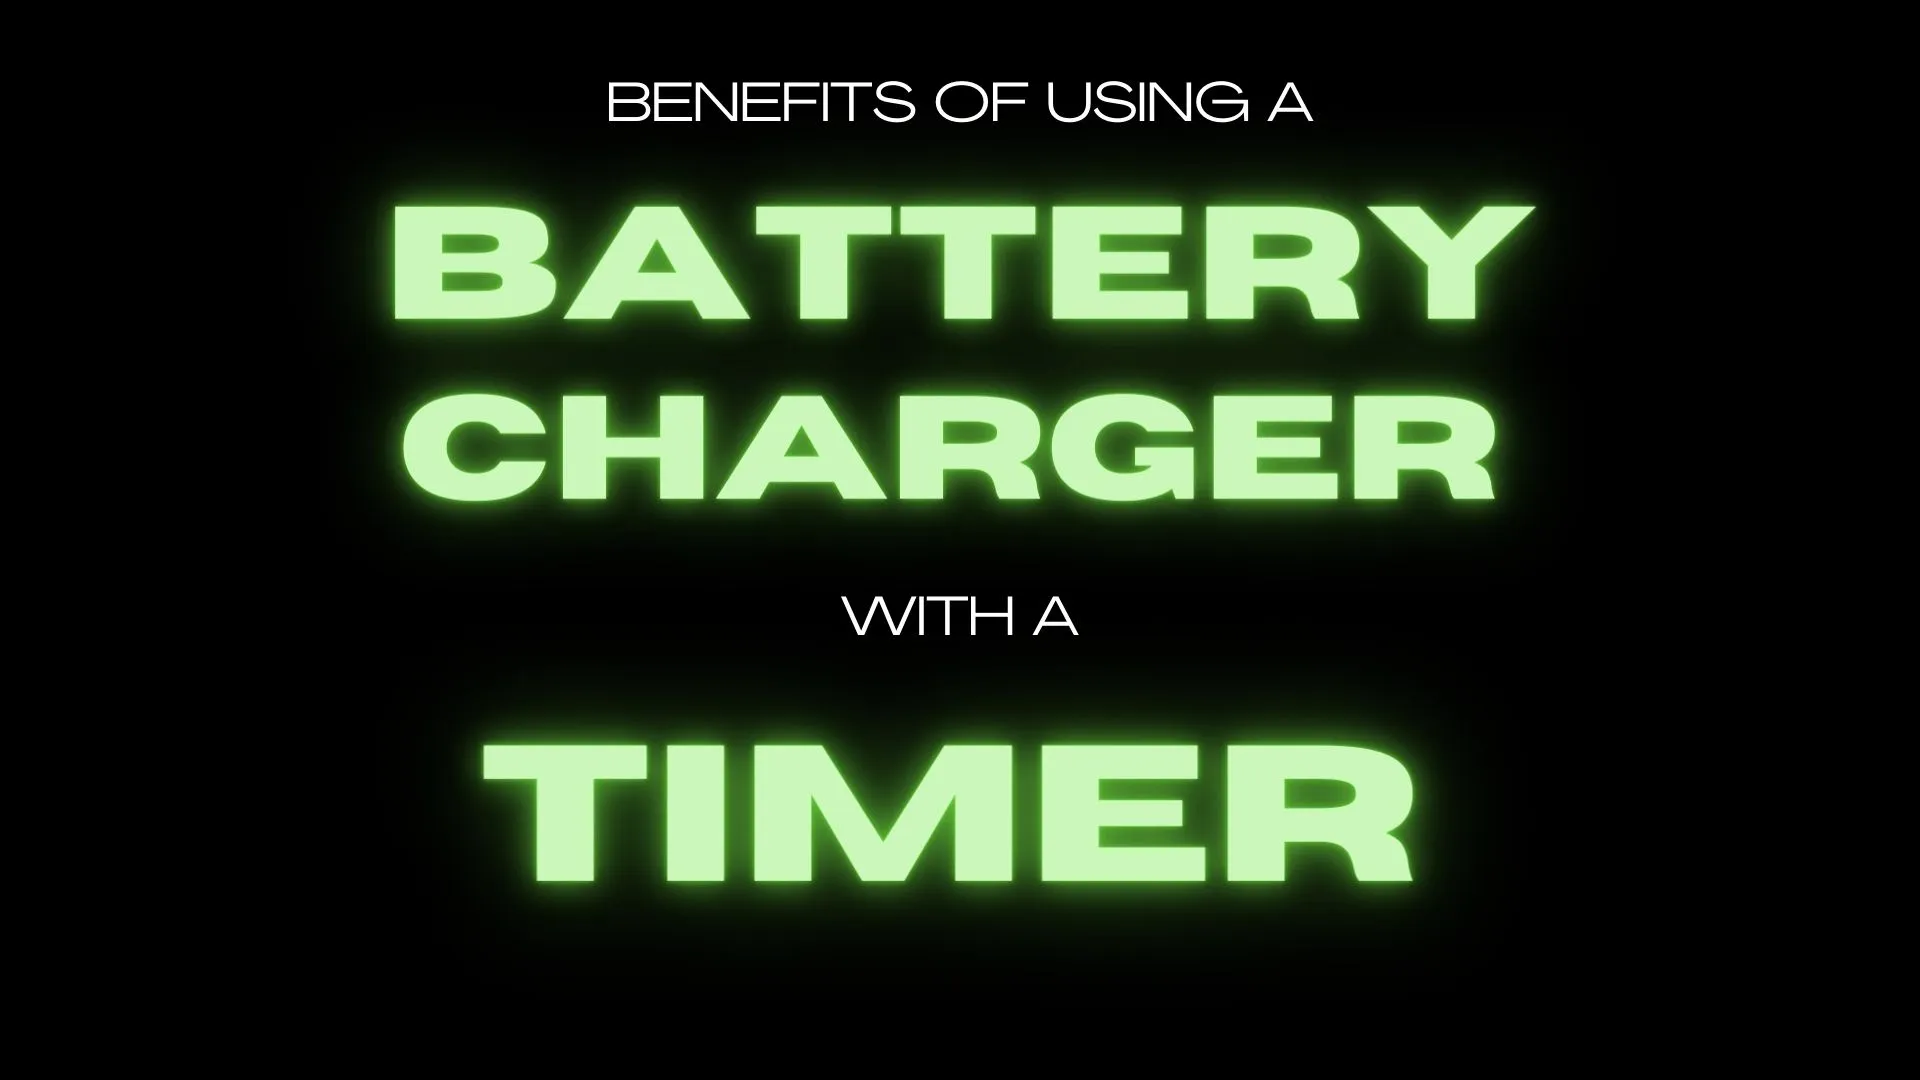 Benefits of Using a Battery Charger With a Timer